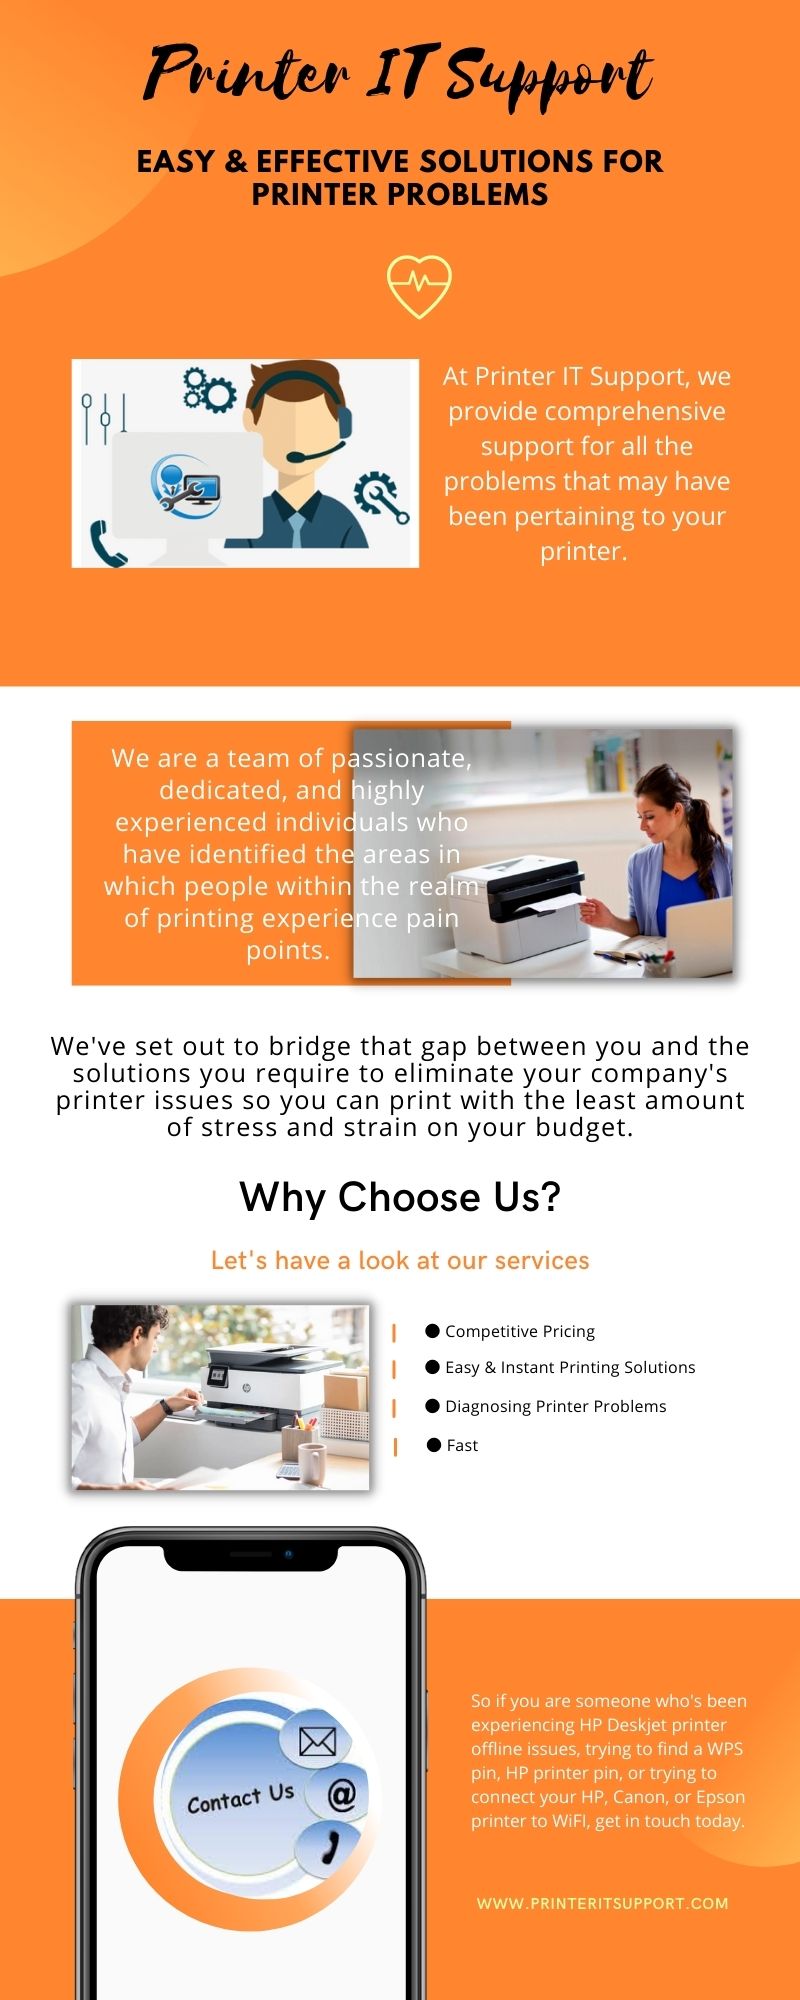 Printer IT Support – Easy & Effective Solutions For Printer Problems